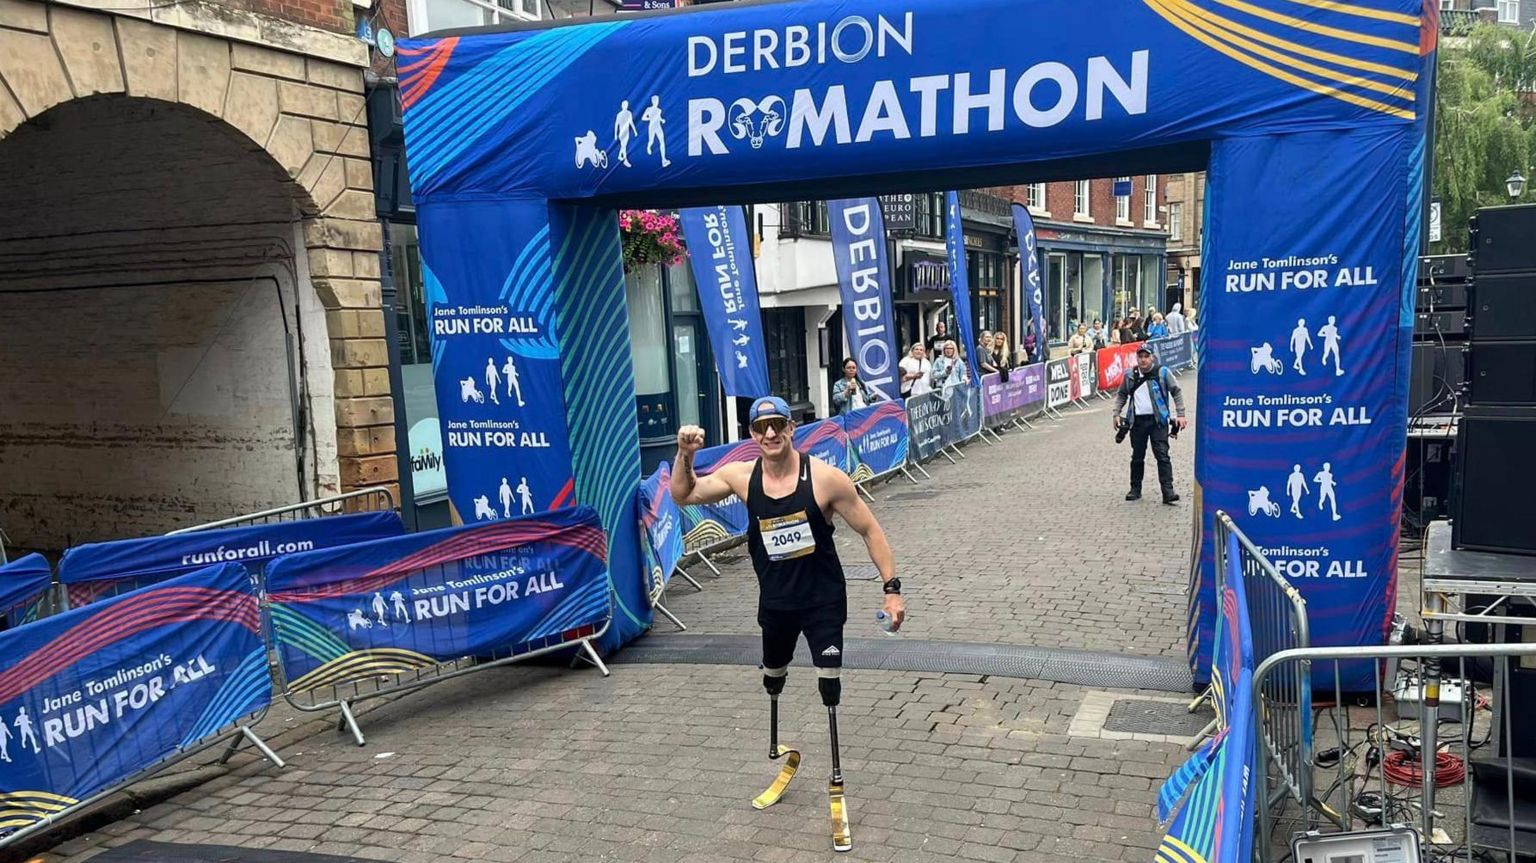 Richard Whitehead at the Ramathon finish line. Around him are blue signs with white writing to show it is the finish line and say "Derby Ramathon"